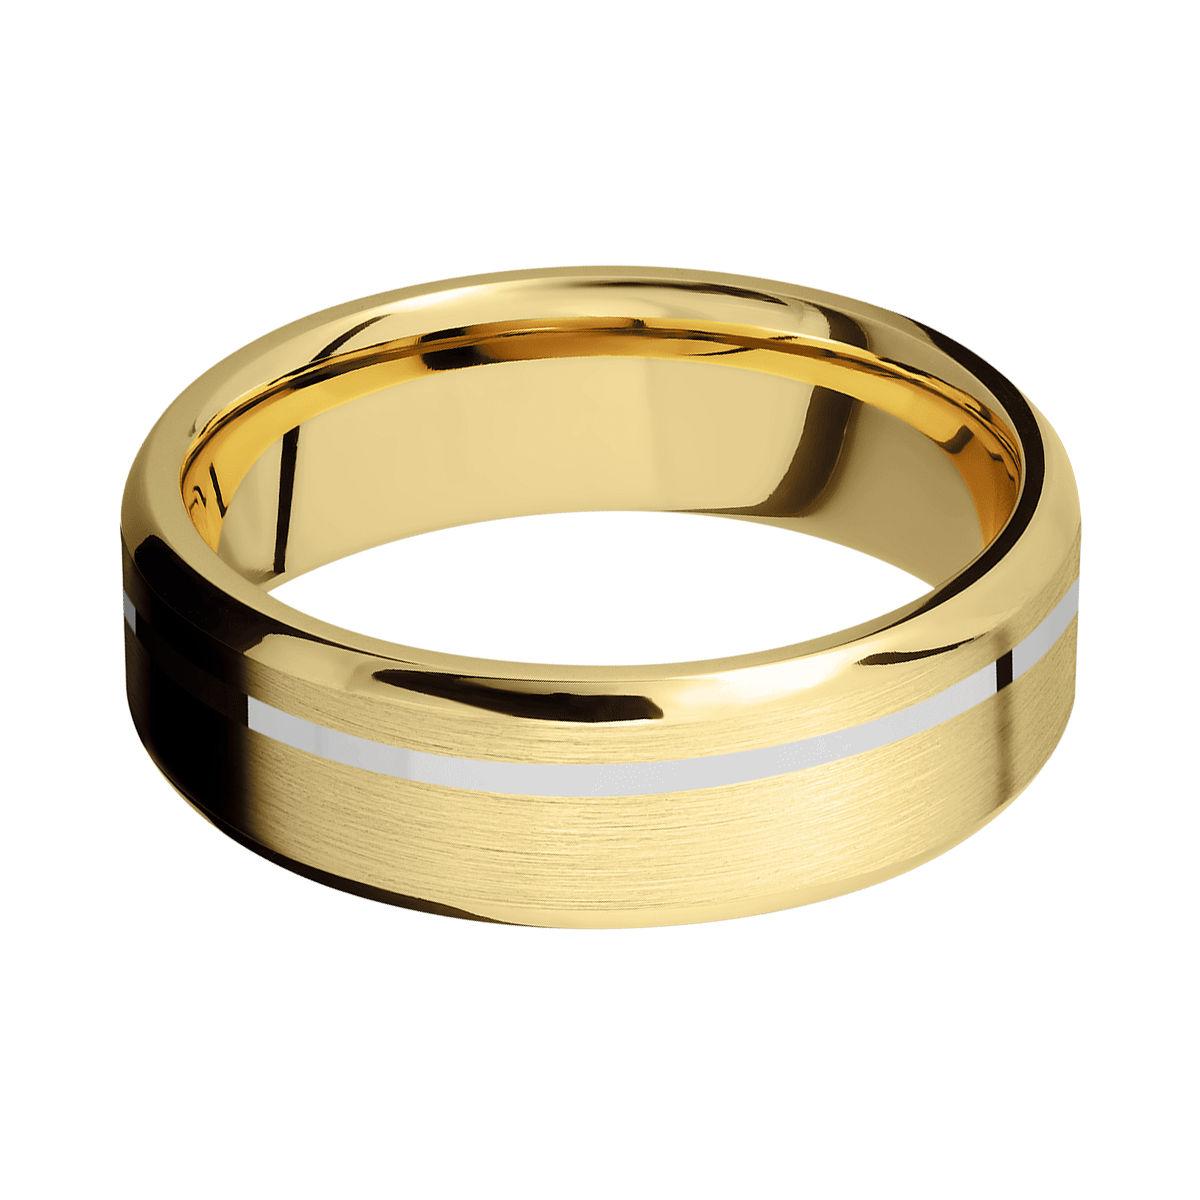 Yellow Gold + Sterling Silver + Satin Finish